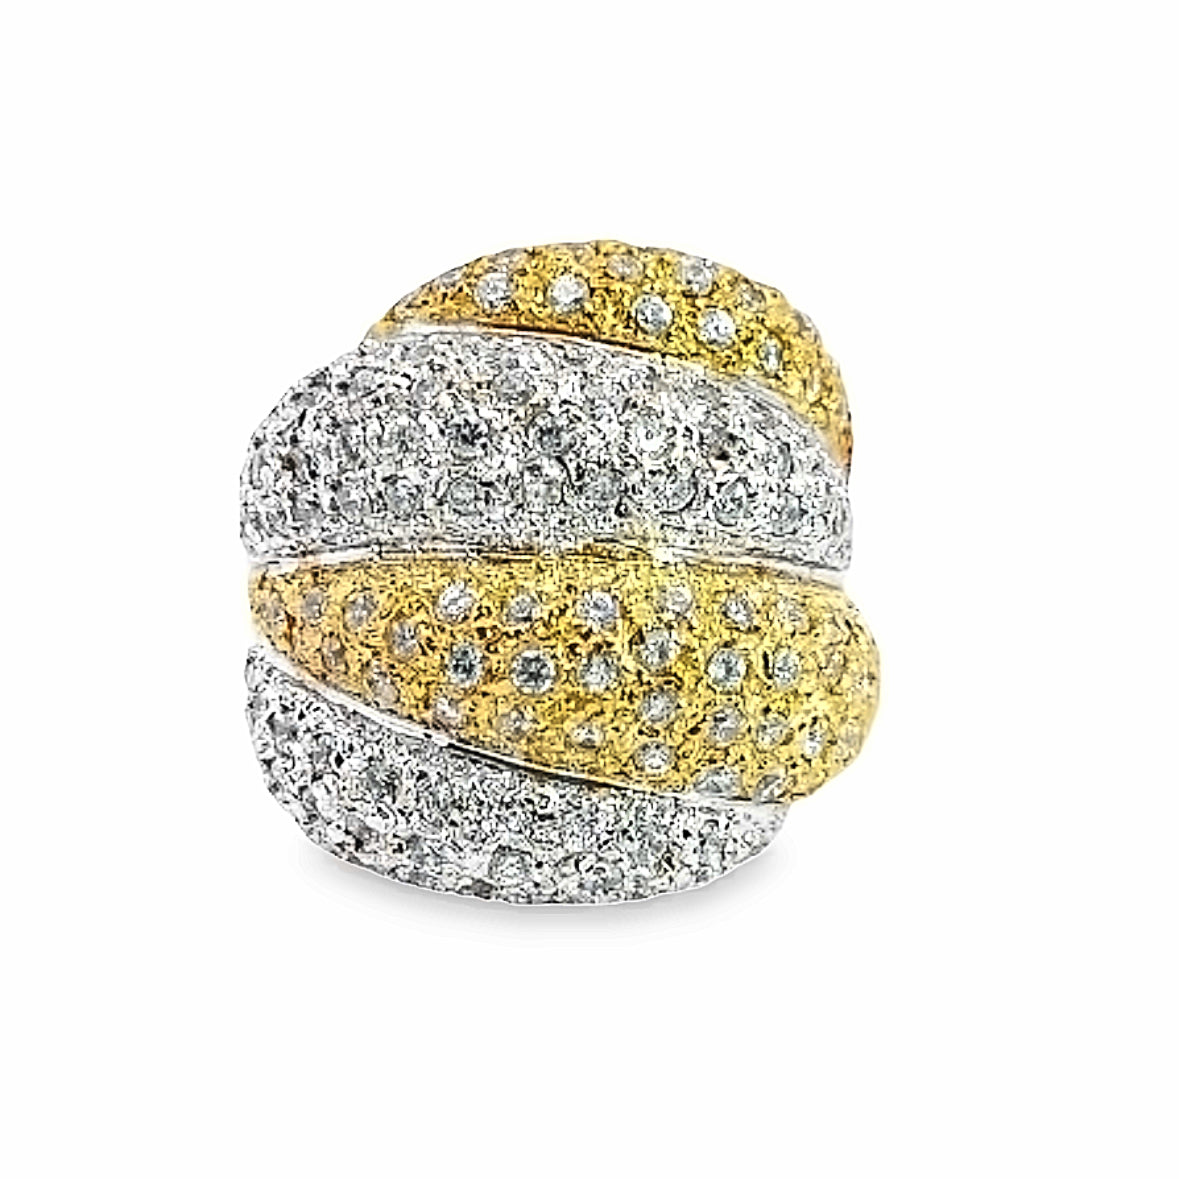 Showstopper Two-Toned 18K White and Yellow Gold Cocktail Ring